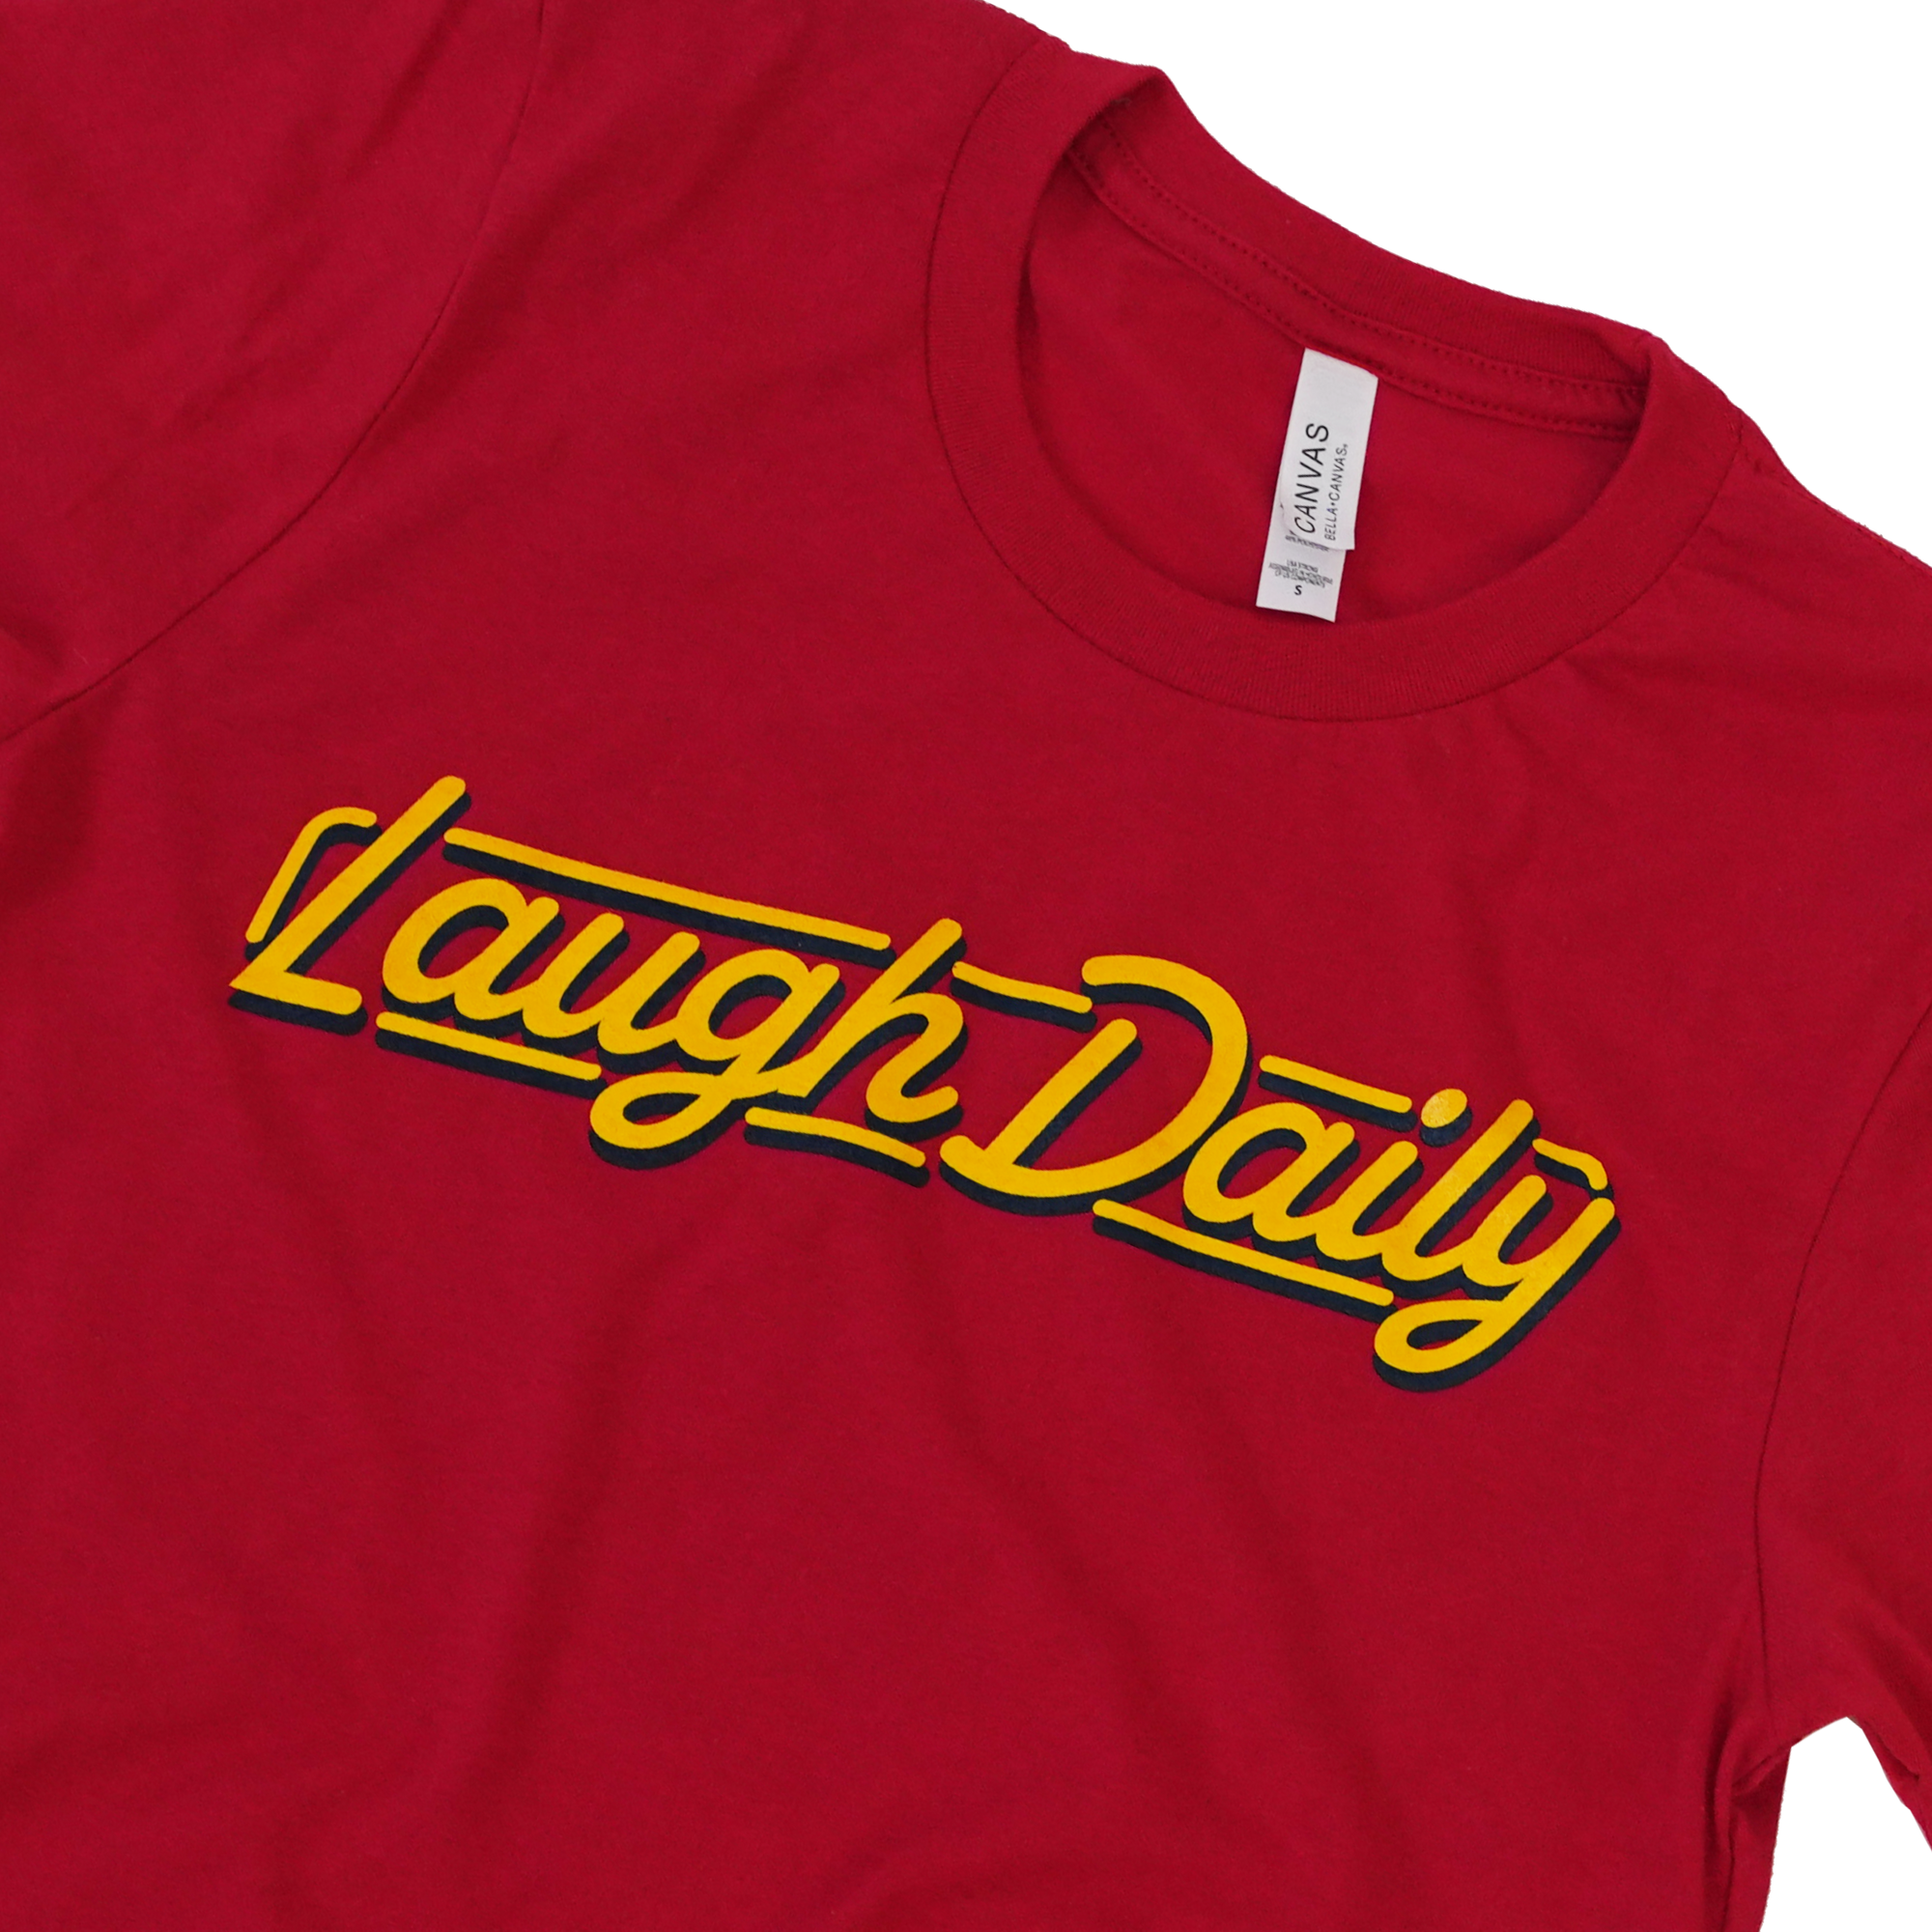 LAUGH DAILY - YOUTH